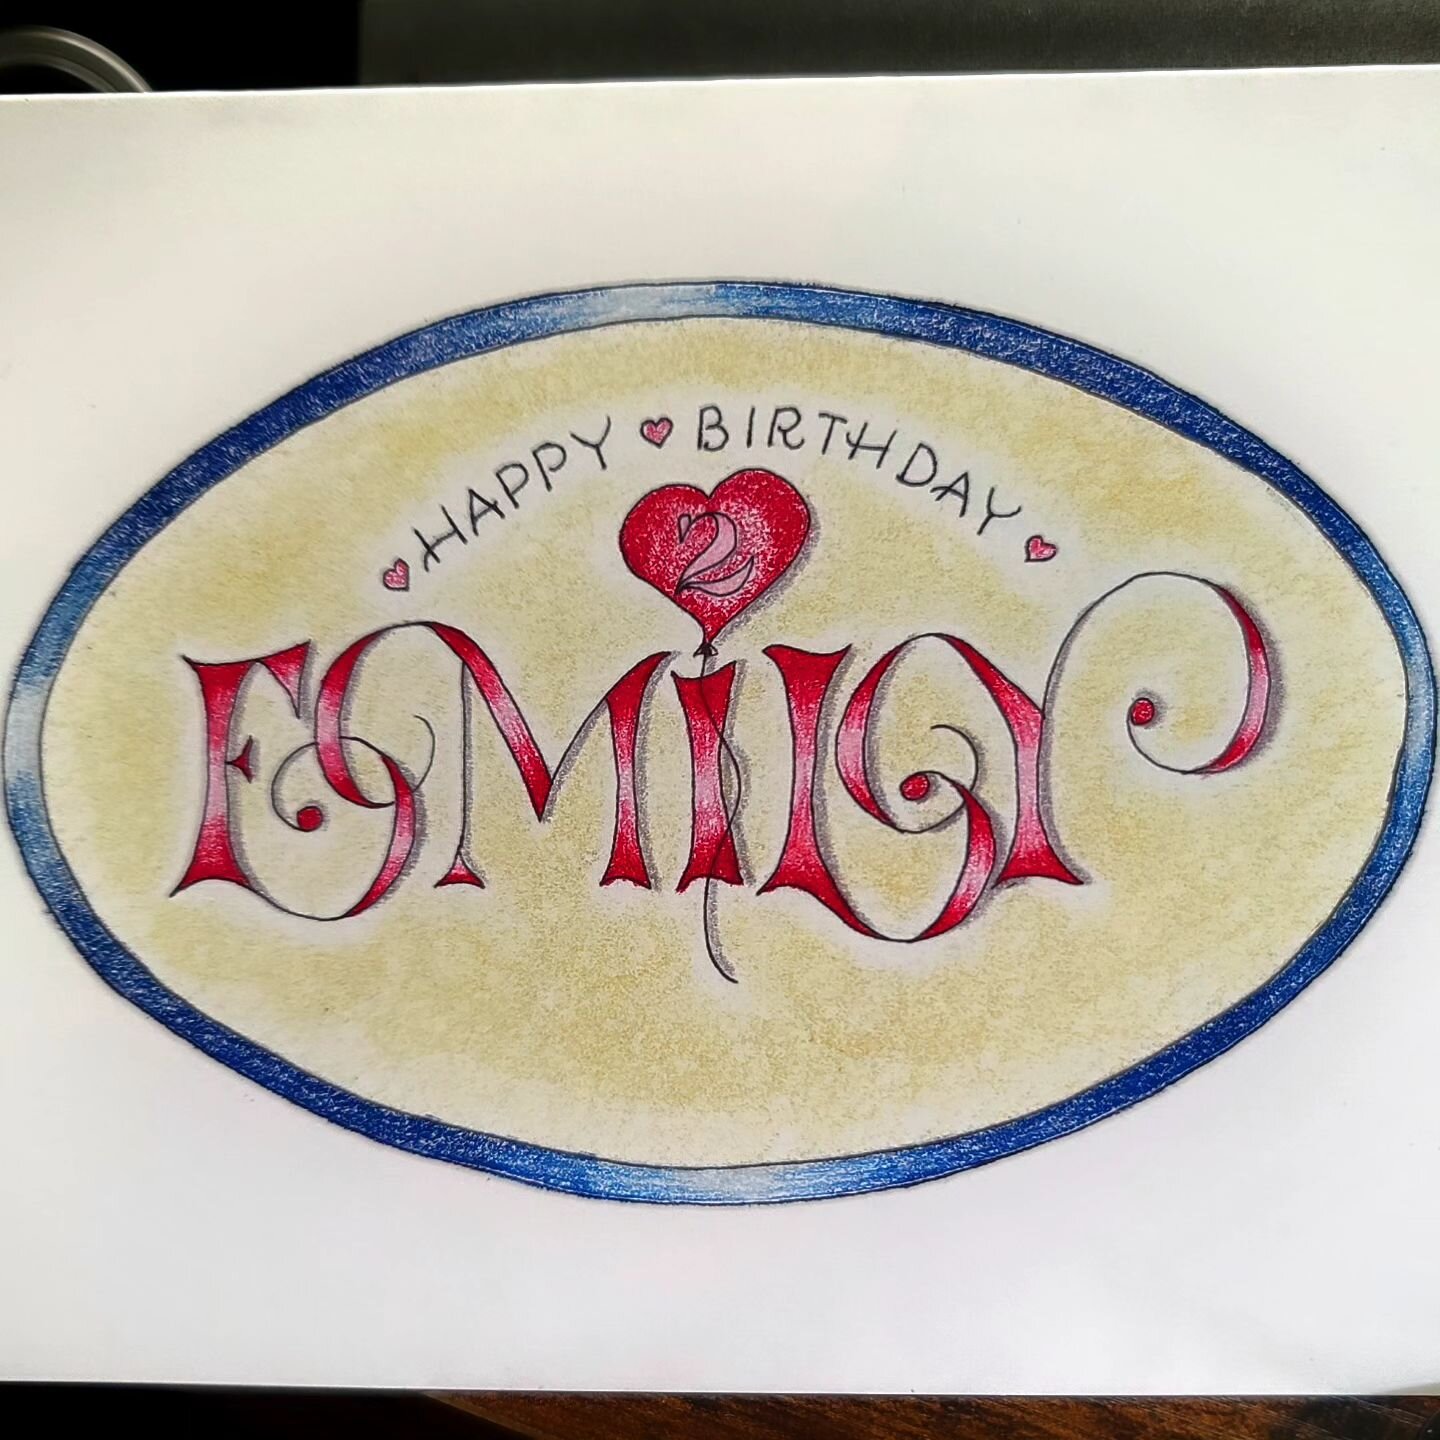 I'm so enjoying making birthday cards for all my new family members! This one was handlettered in colored pencil at 5x7. But I thought it would fare better in the hands of a toddler if it were smaller and printed. I like the results of this digitized